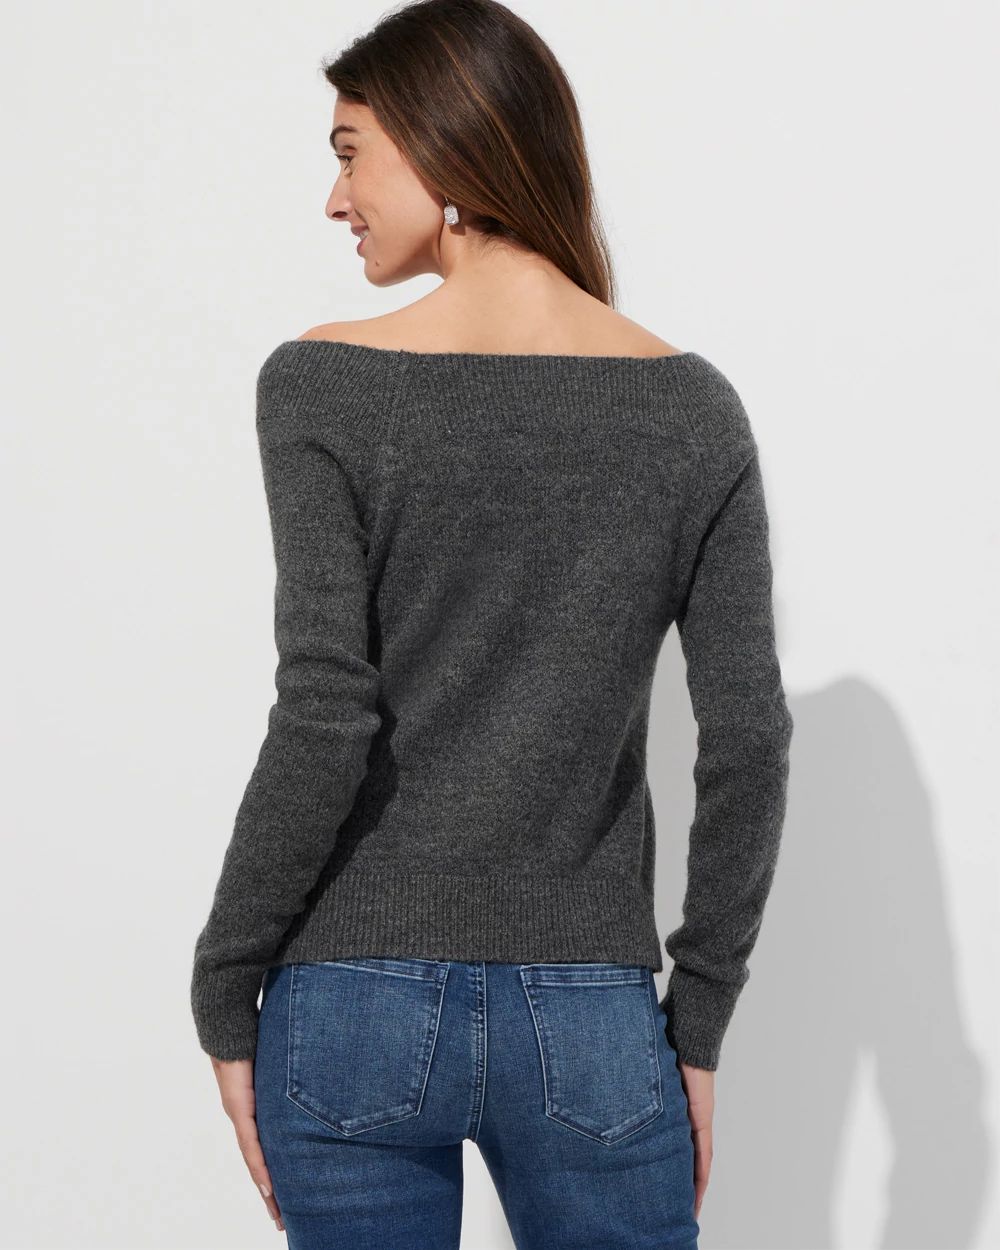 Outlet WHBM Long Sleeve At-The-Shoulder Pullover click to view larger image.